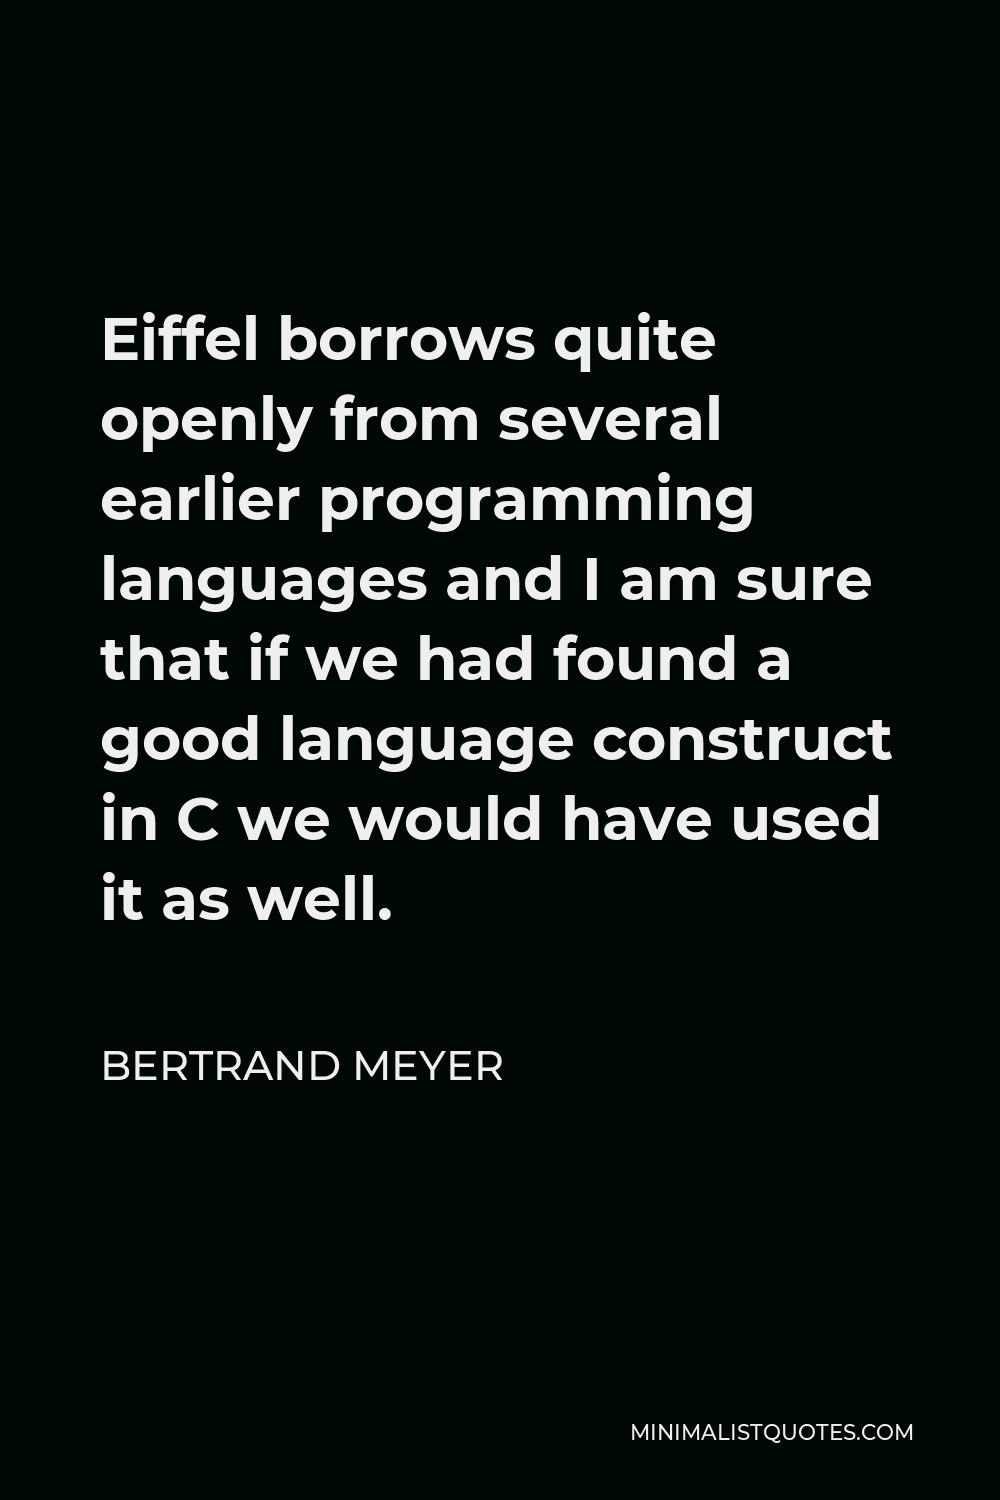 Bertrand Meyer Quote - Eiffel borrows quite openly from several earlier programming languages and I am sure that if we had found a good language construct in C we would have used it as well.